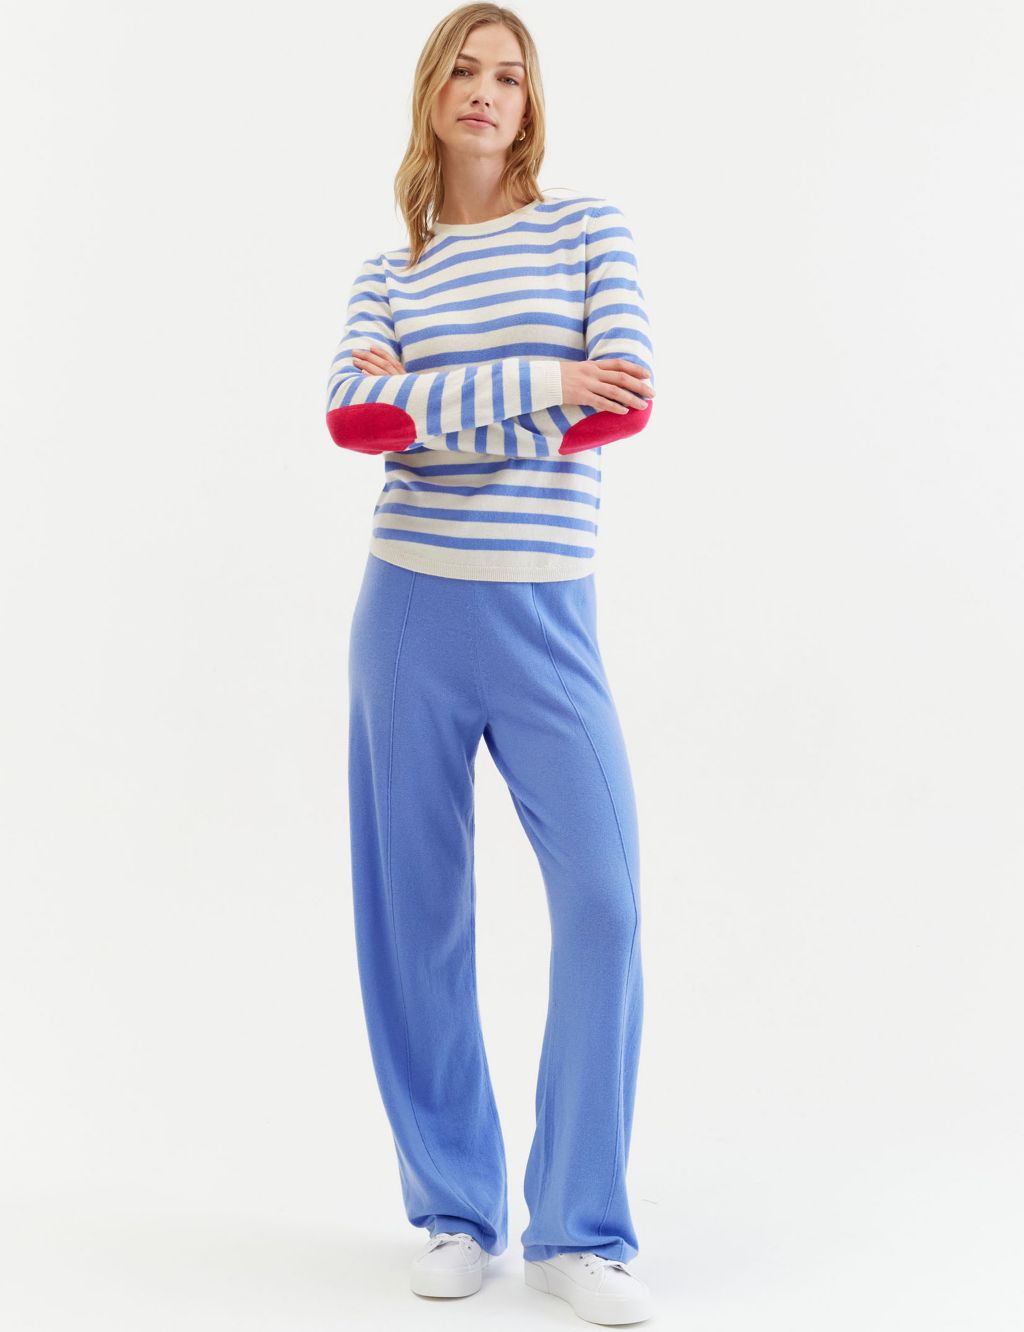 Wool Rich Striped Sweatshirt with Cashmere 5 of 5